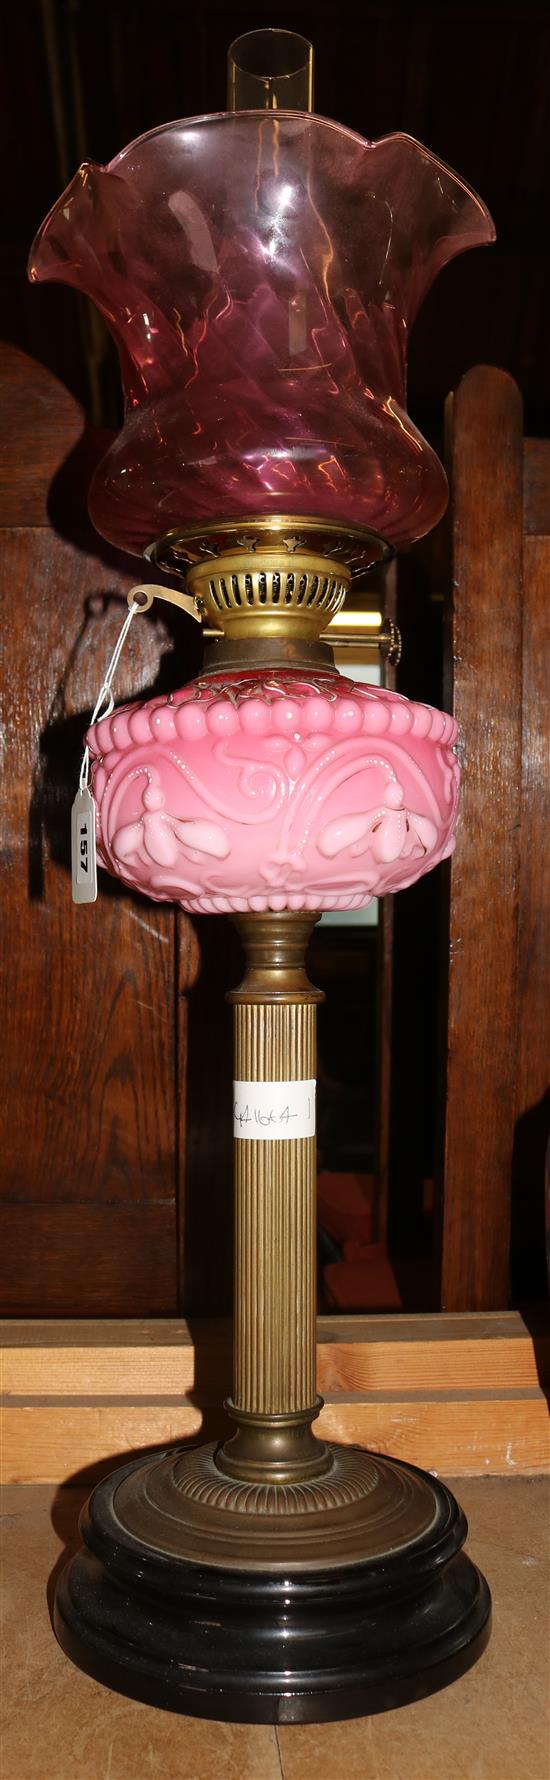 Victorian oil lamp with pink opaque oil reservoir & cranberry shade